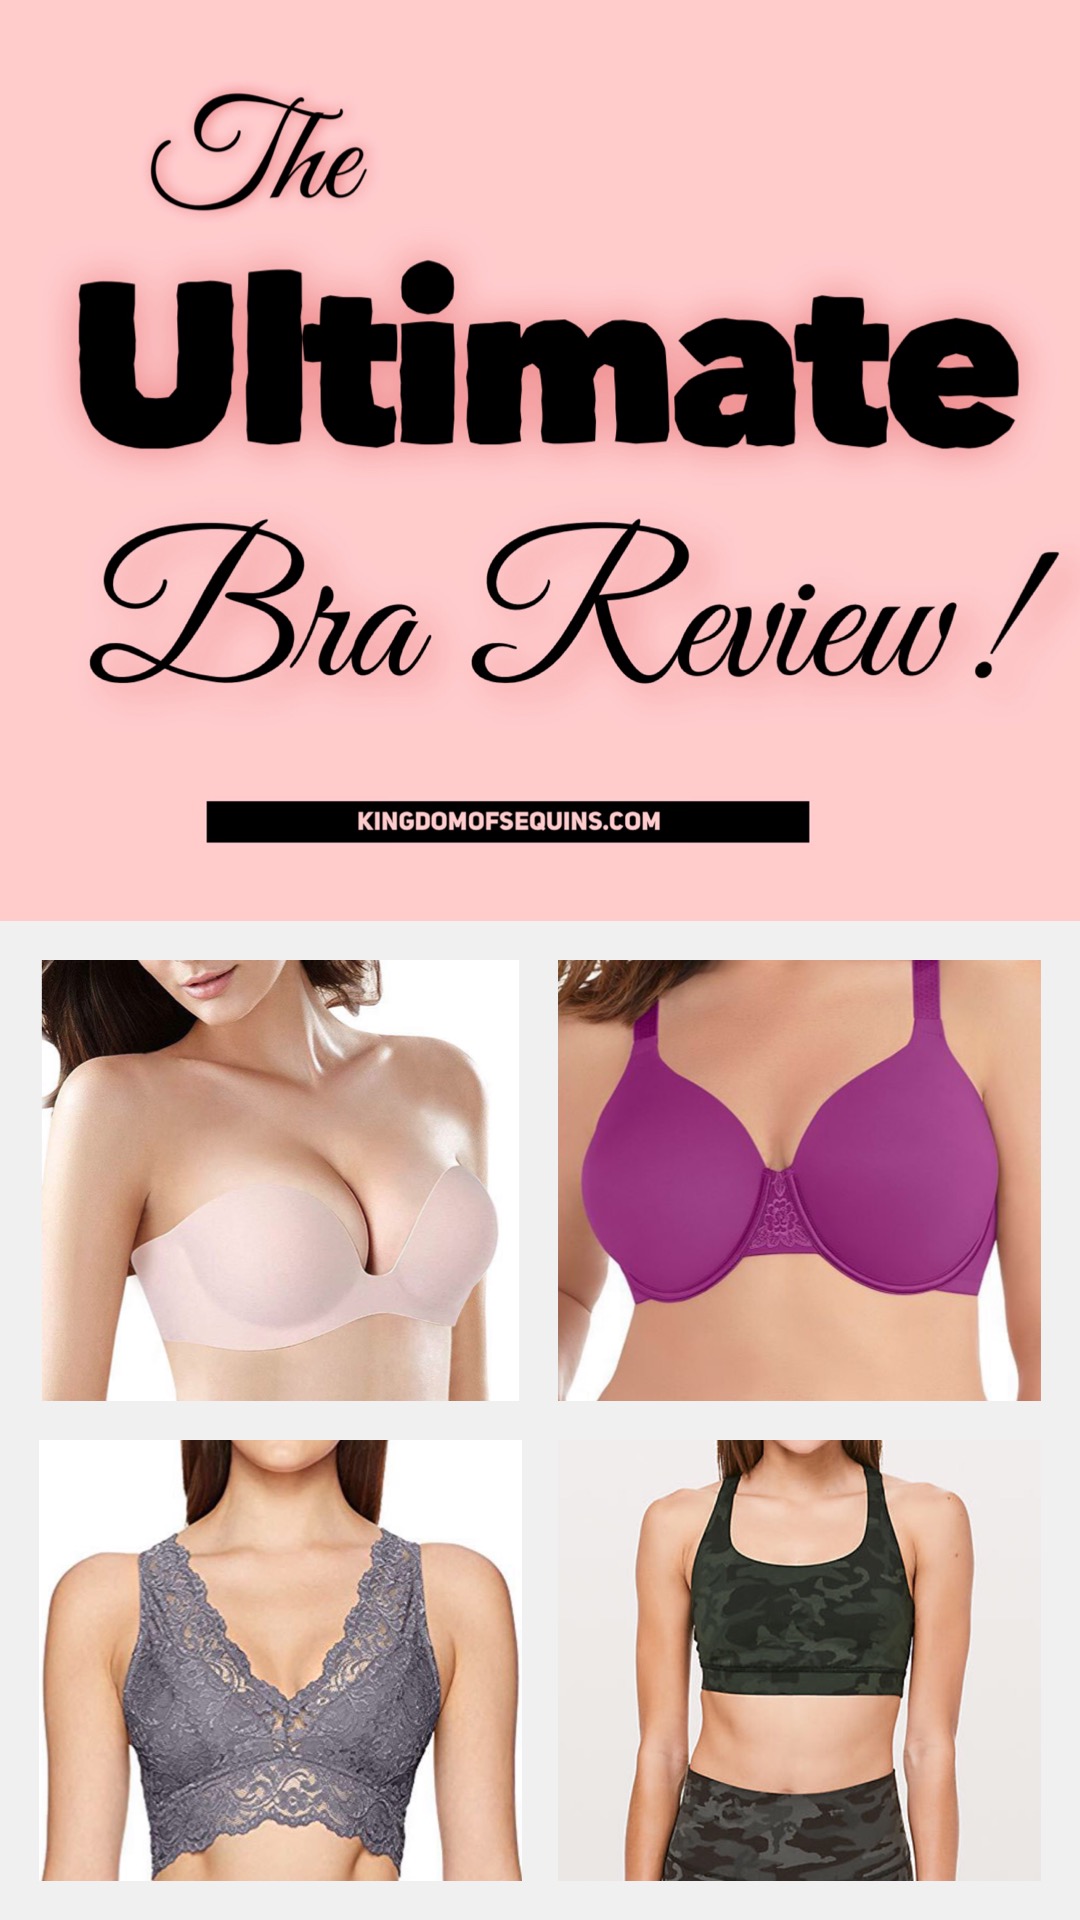 The Ultimate Bra Review: Regular, Strapless, Active, Sticky